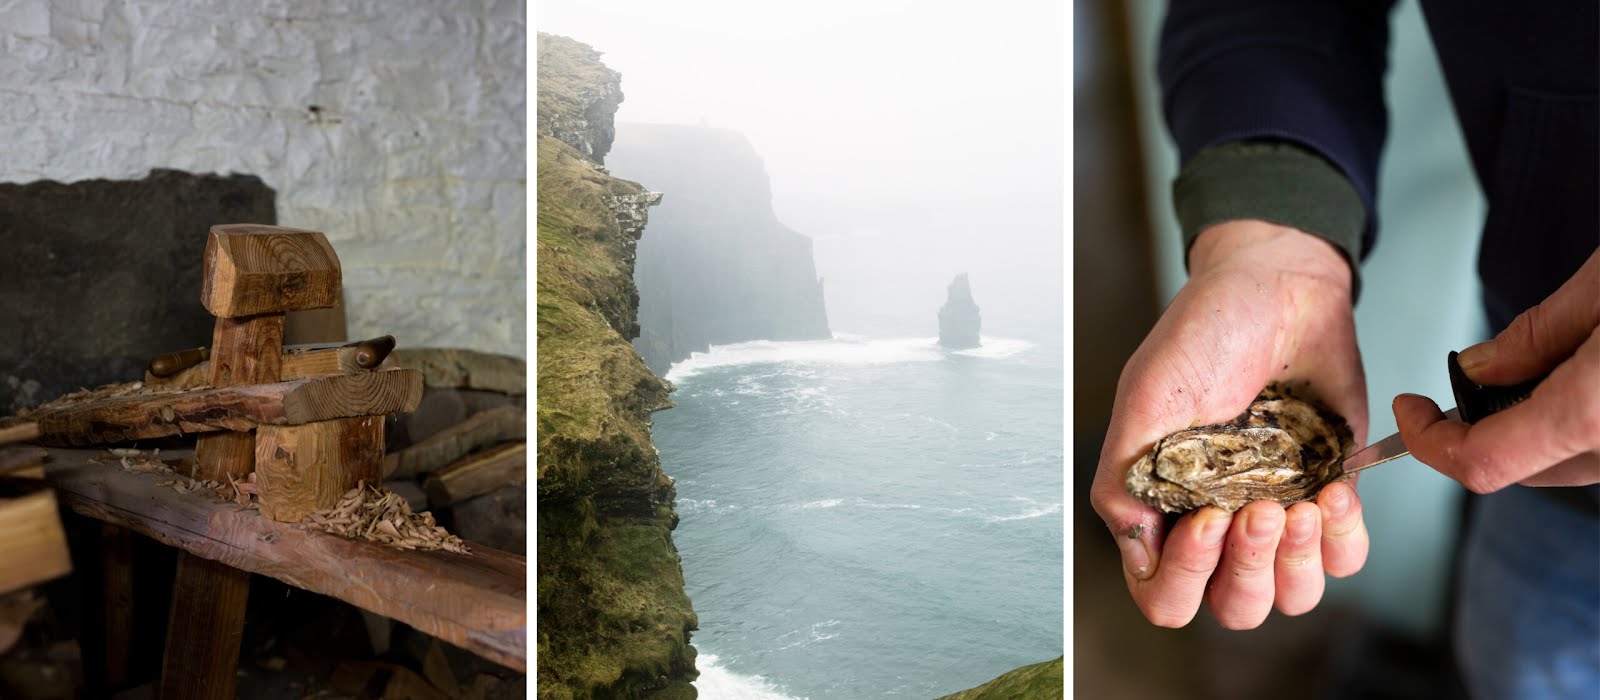 We meet the makers, creators, producers and chefs who are the driving force behind Co Clare’s flourishing creative scene